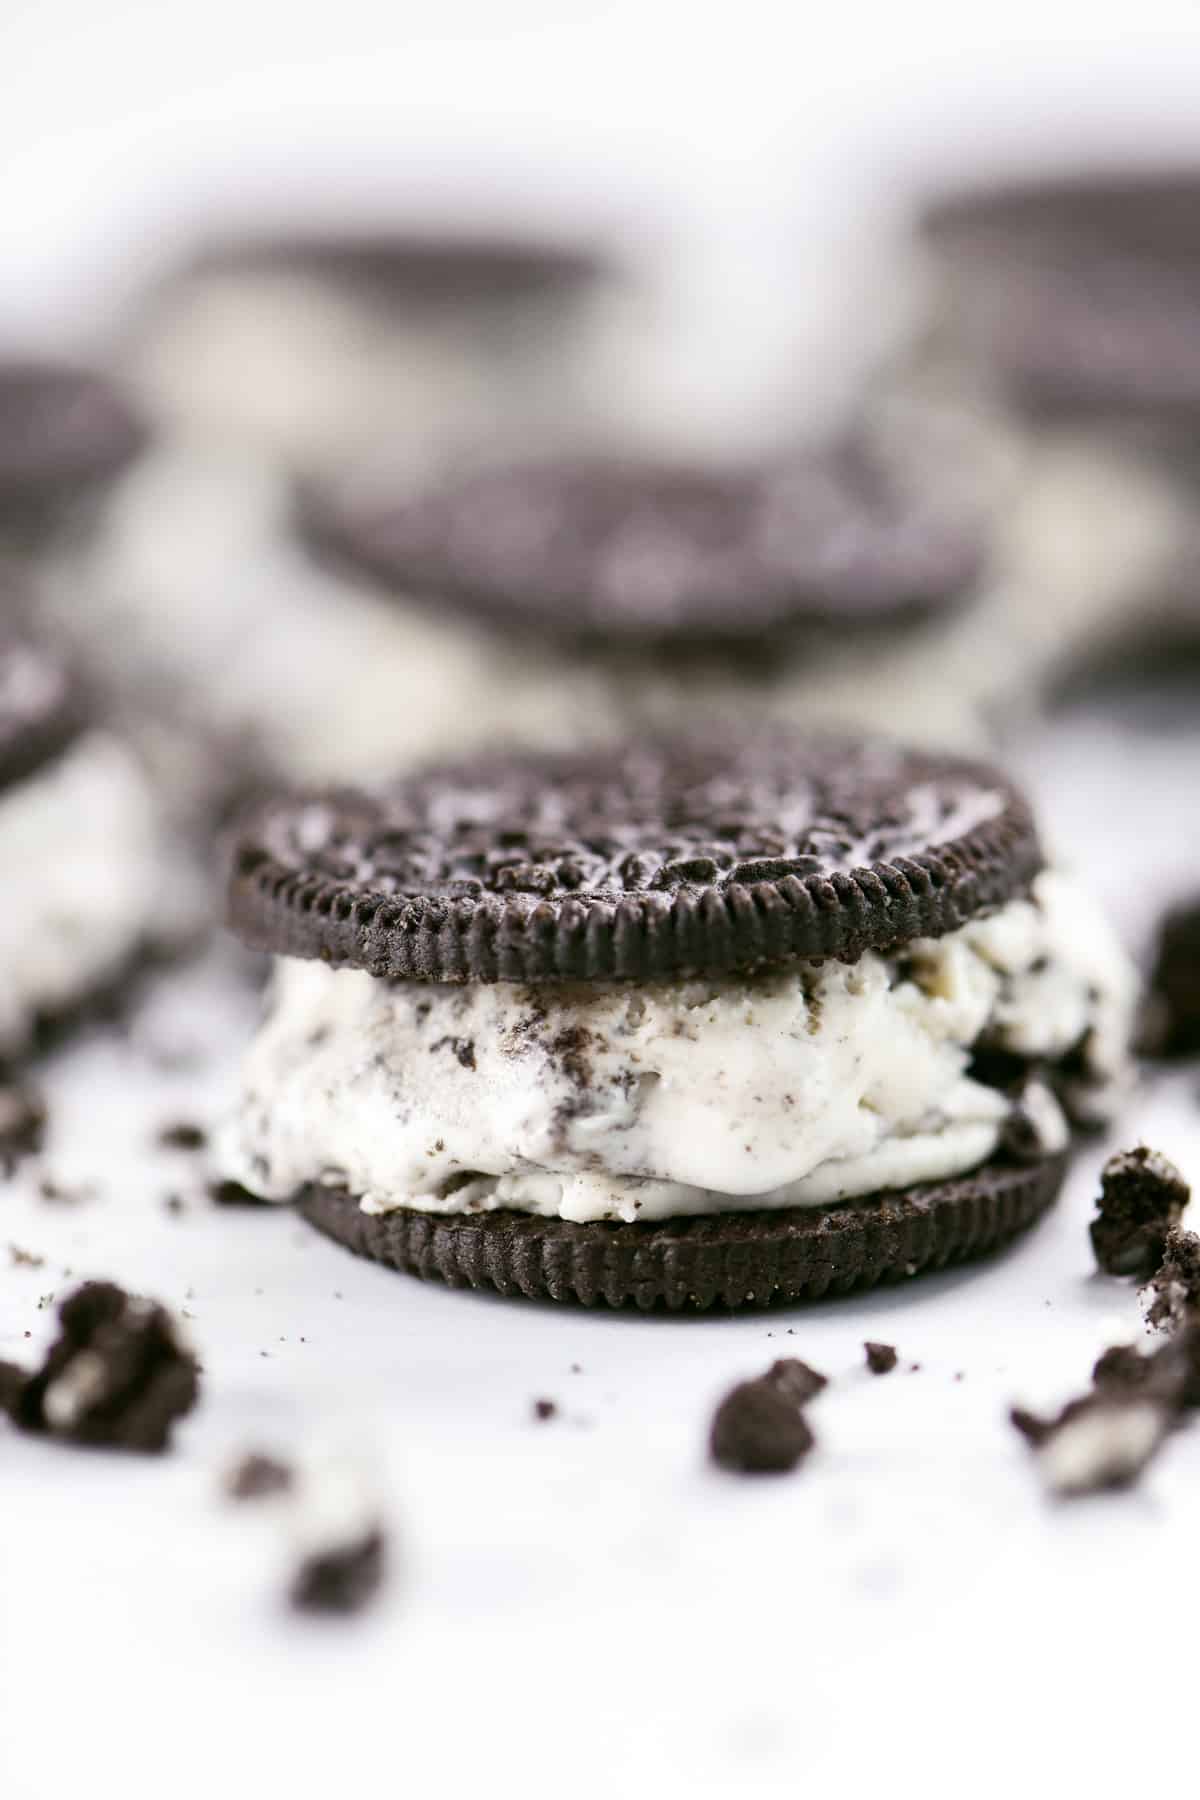 Oreo ice cream sandwiched in an Oreo cookie.